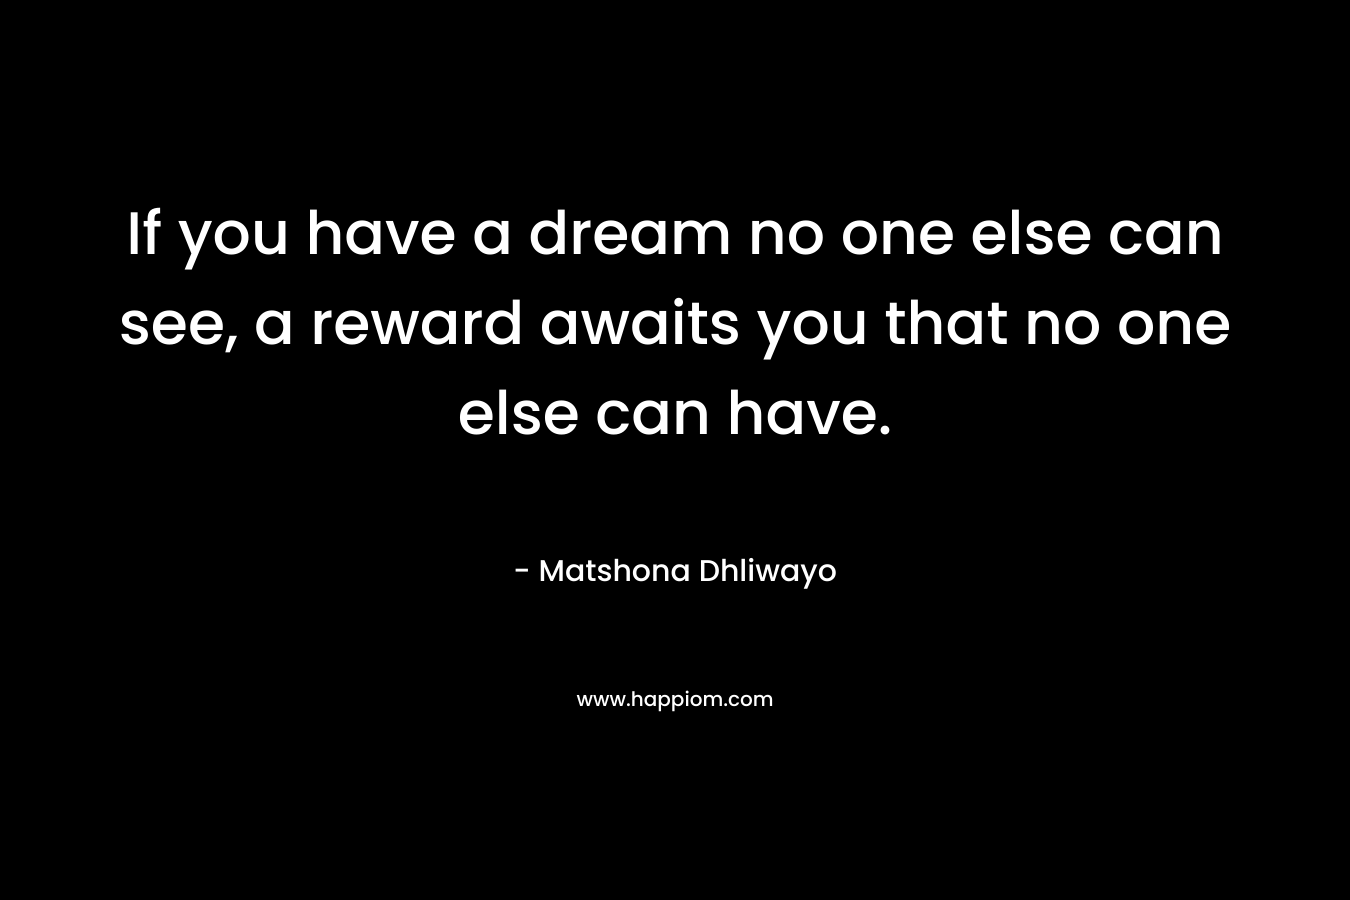 If you have a dream no one else can see, a reward awaits you that no one else can have.